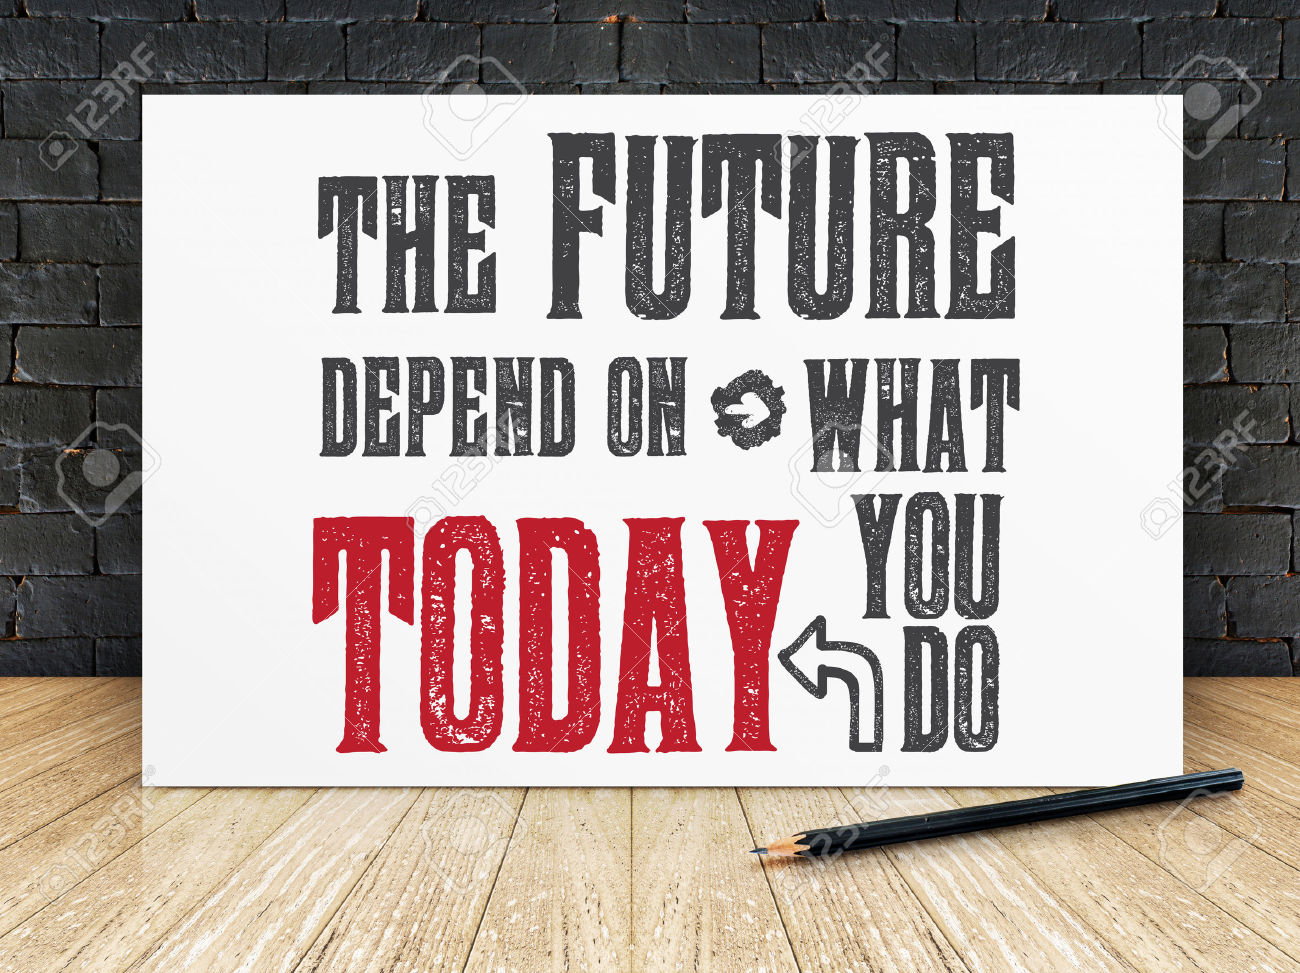 45362956-Inspiration-quote-The-future-depend-on-what-you-do-today-on-white-frame-in-black-brick-wall-and-wood-Stock-Photo.jpg